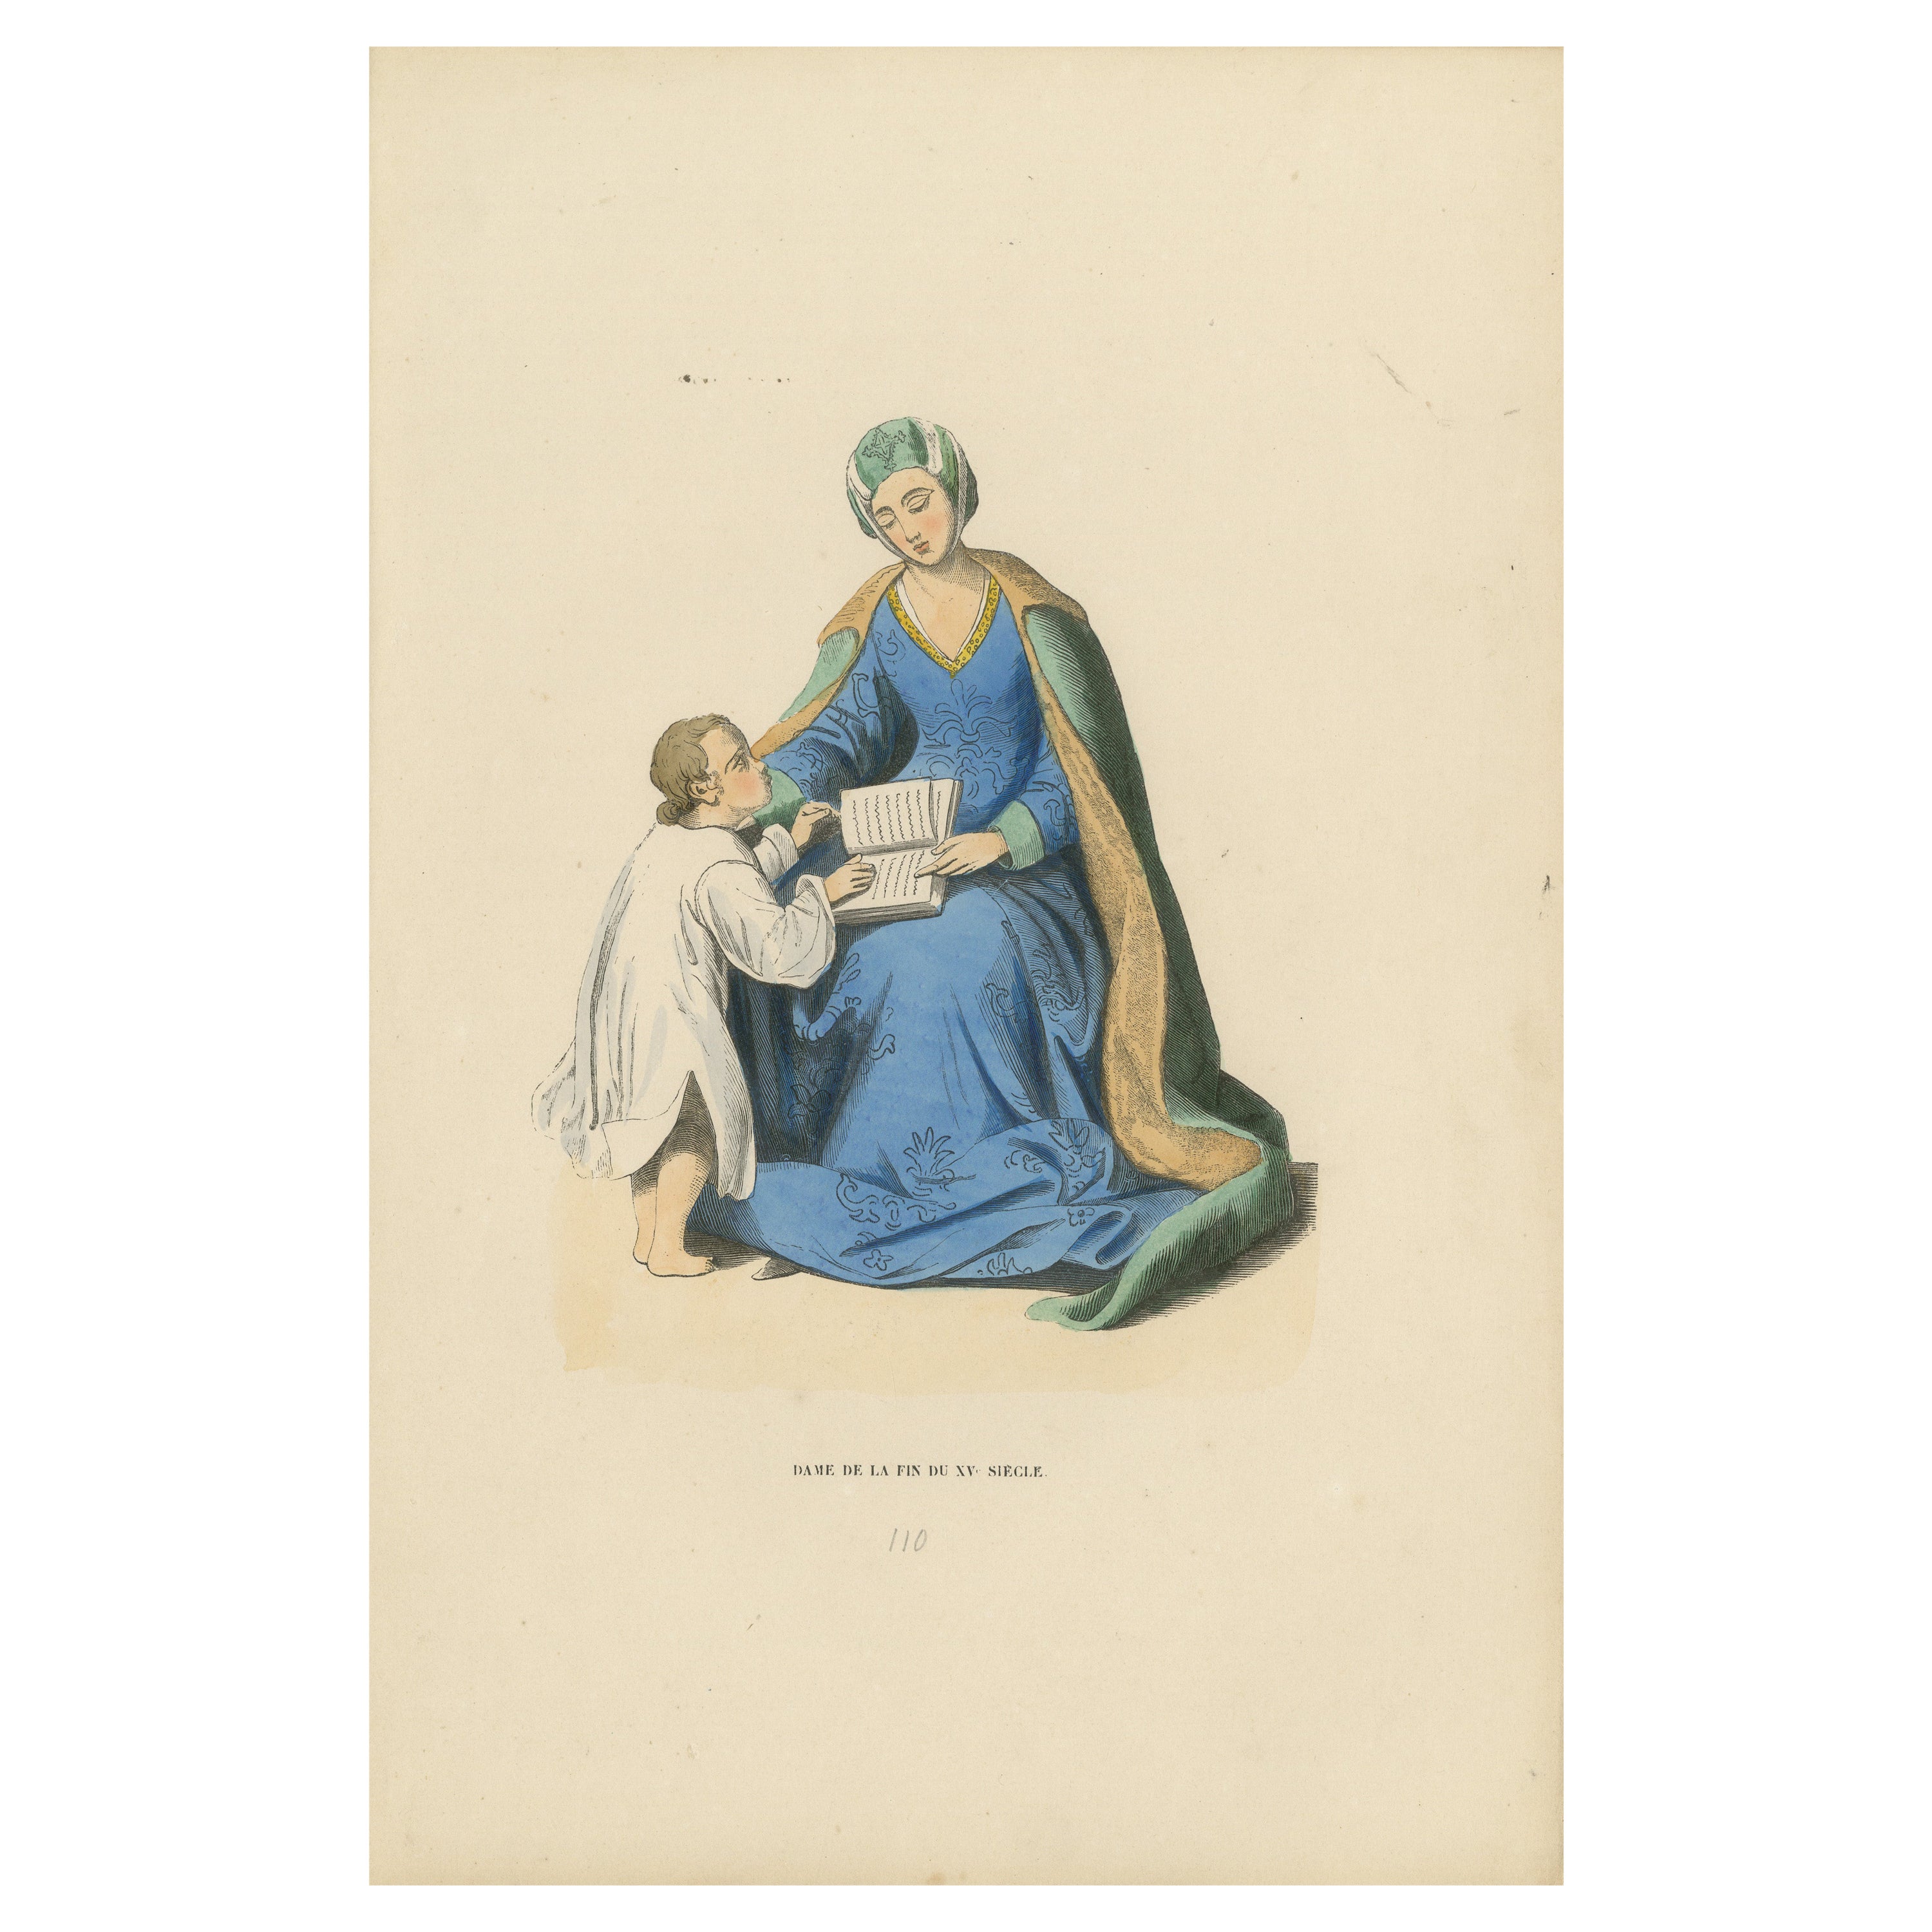 Maternal Instruction in the 15th Century: A Noblewoman Teaching a Child, 1847